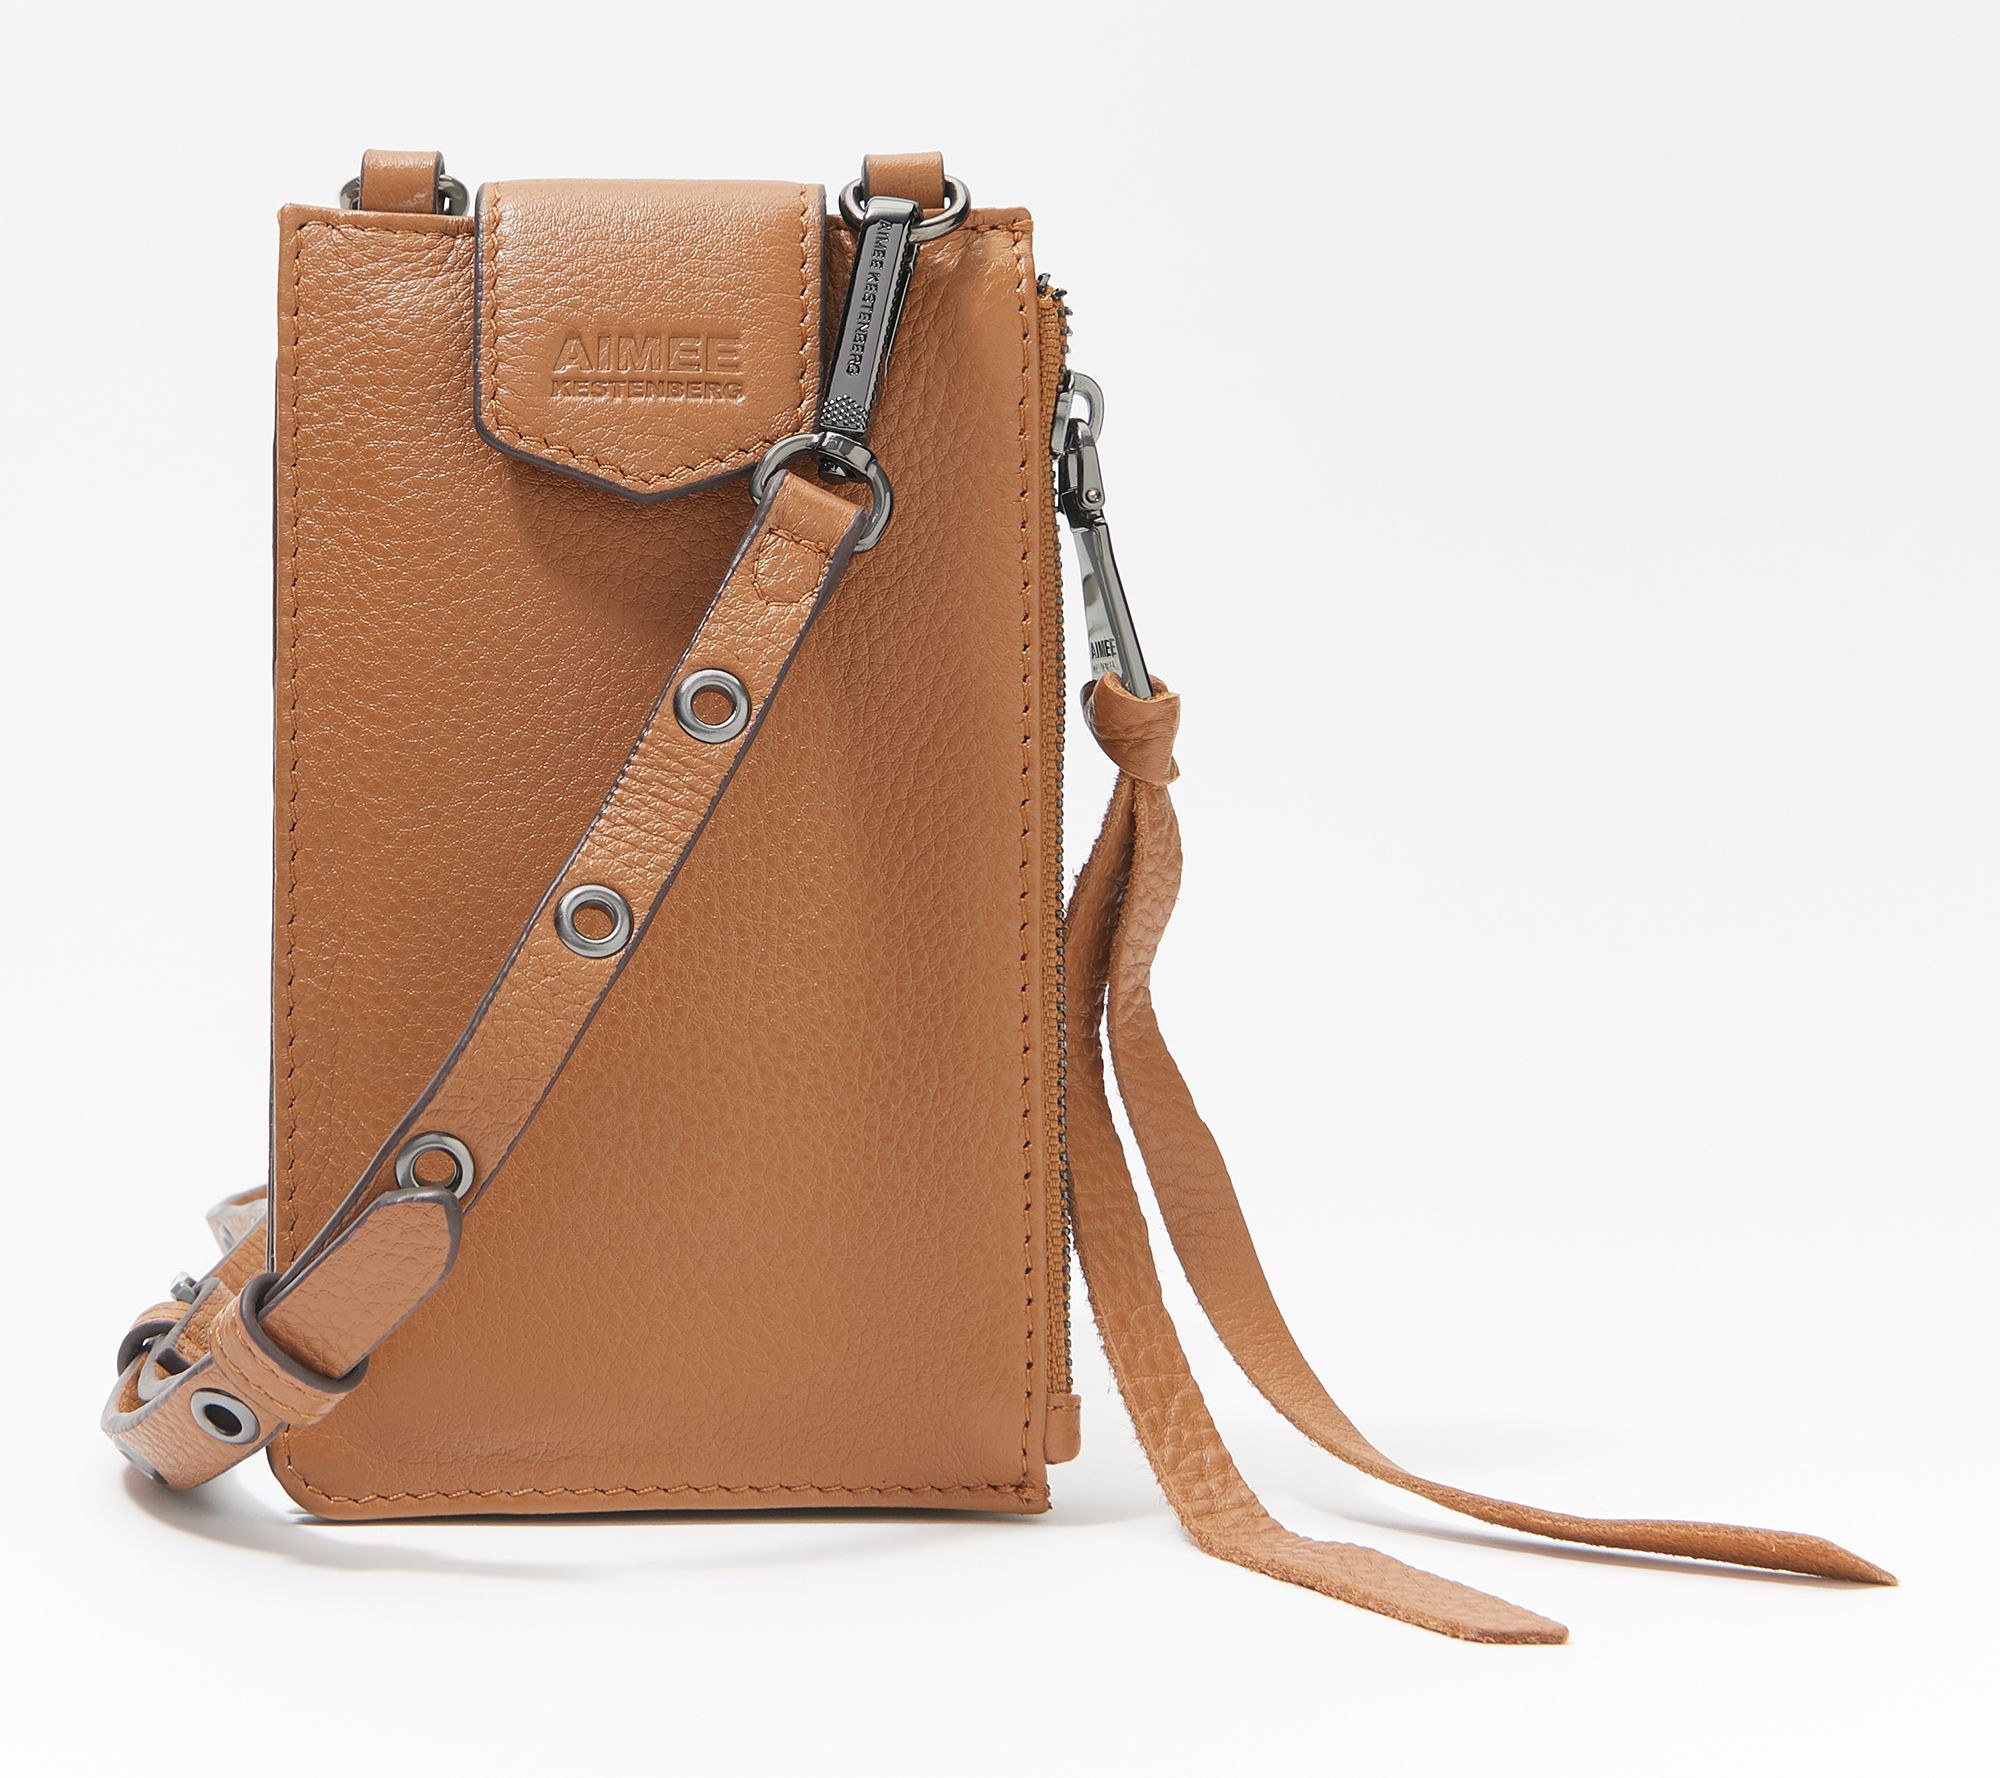 As Is Aimee Kestenberg Handheld Leather Pouch - All My Heart 